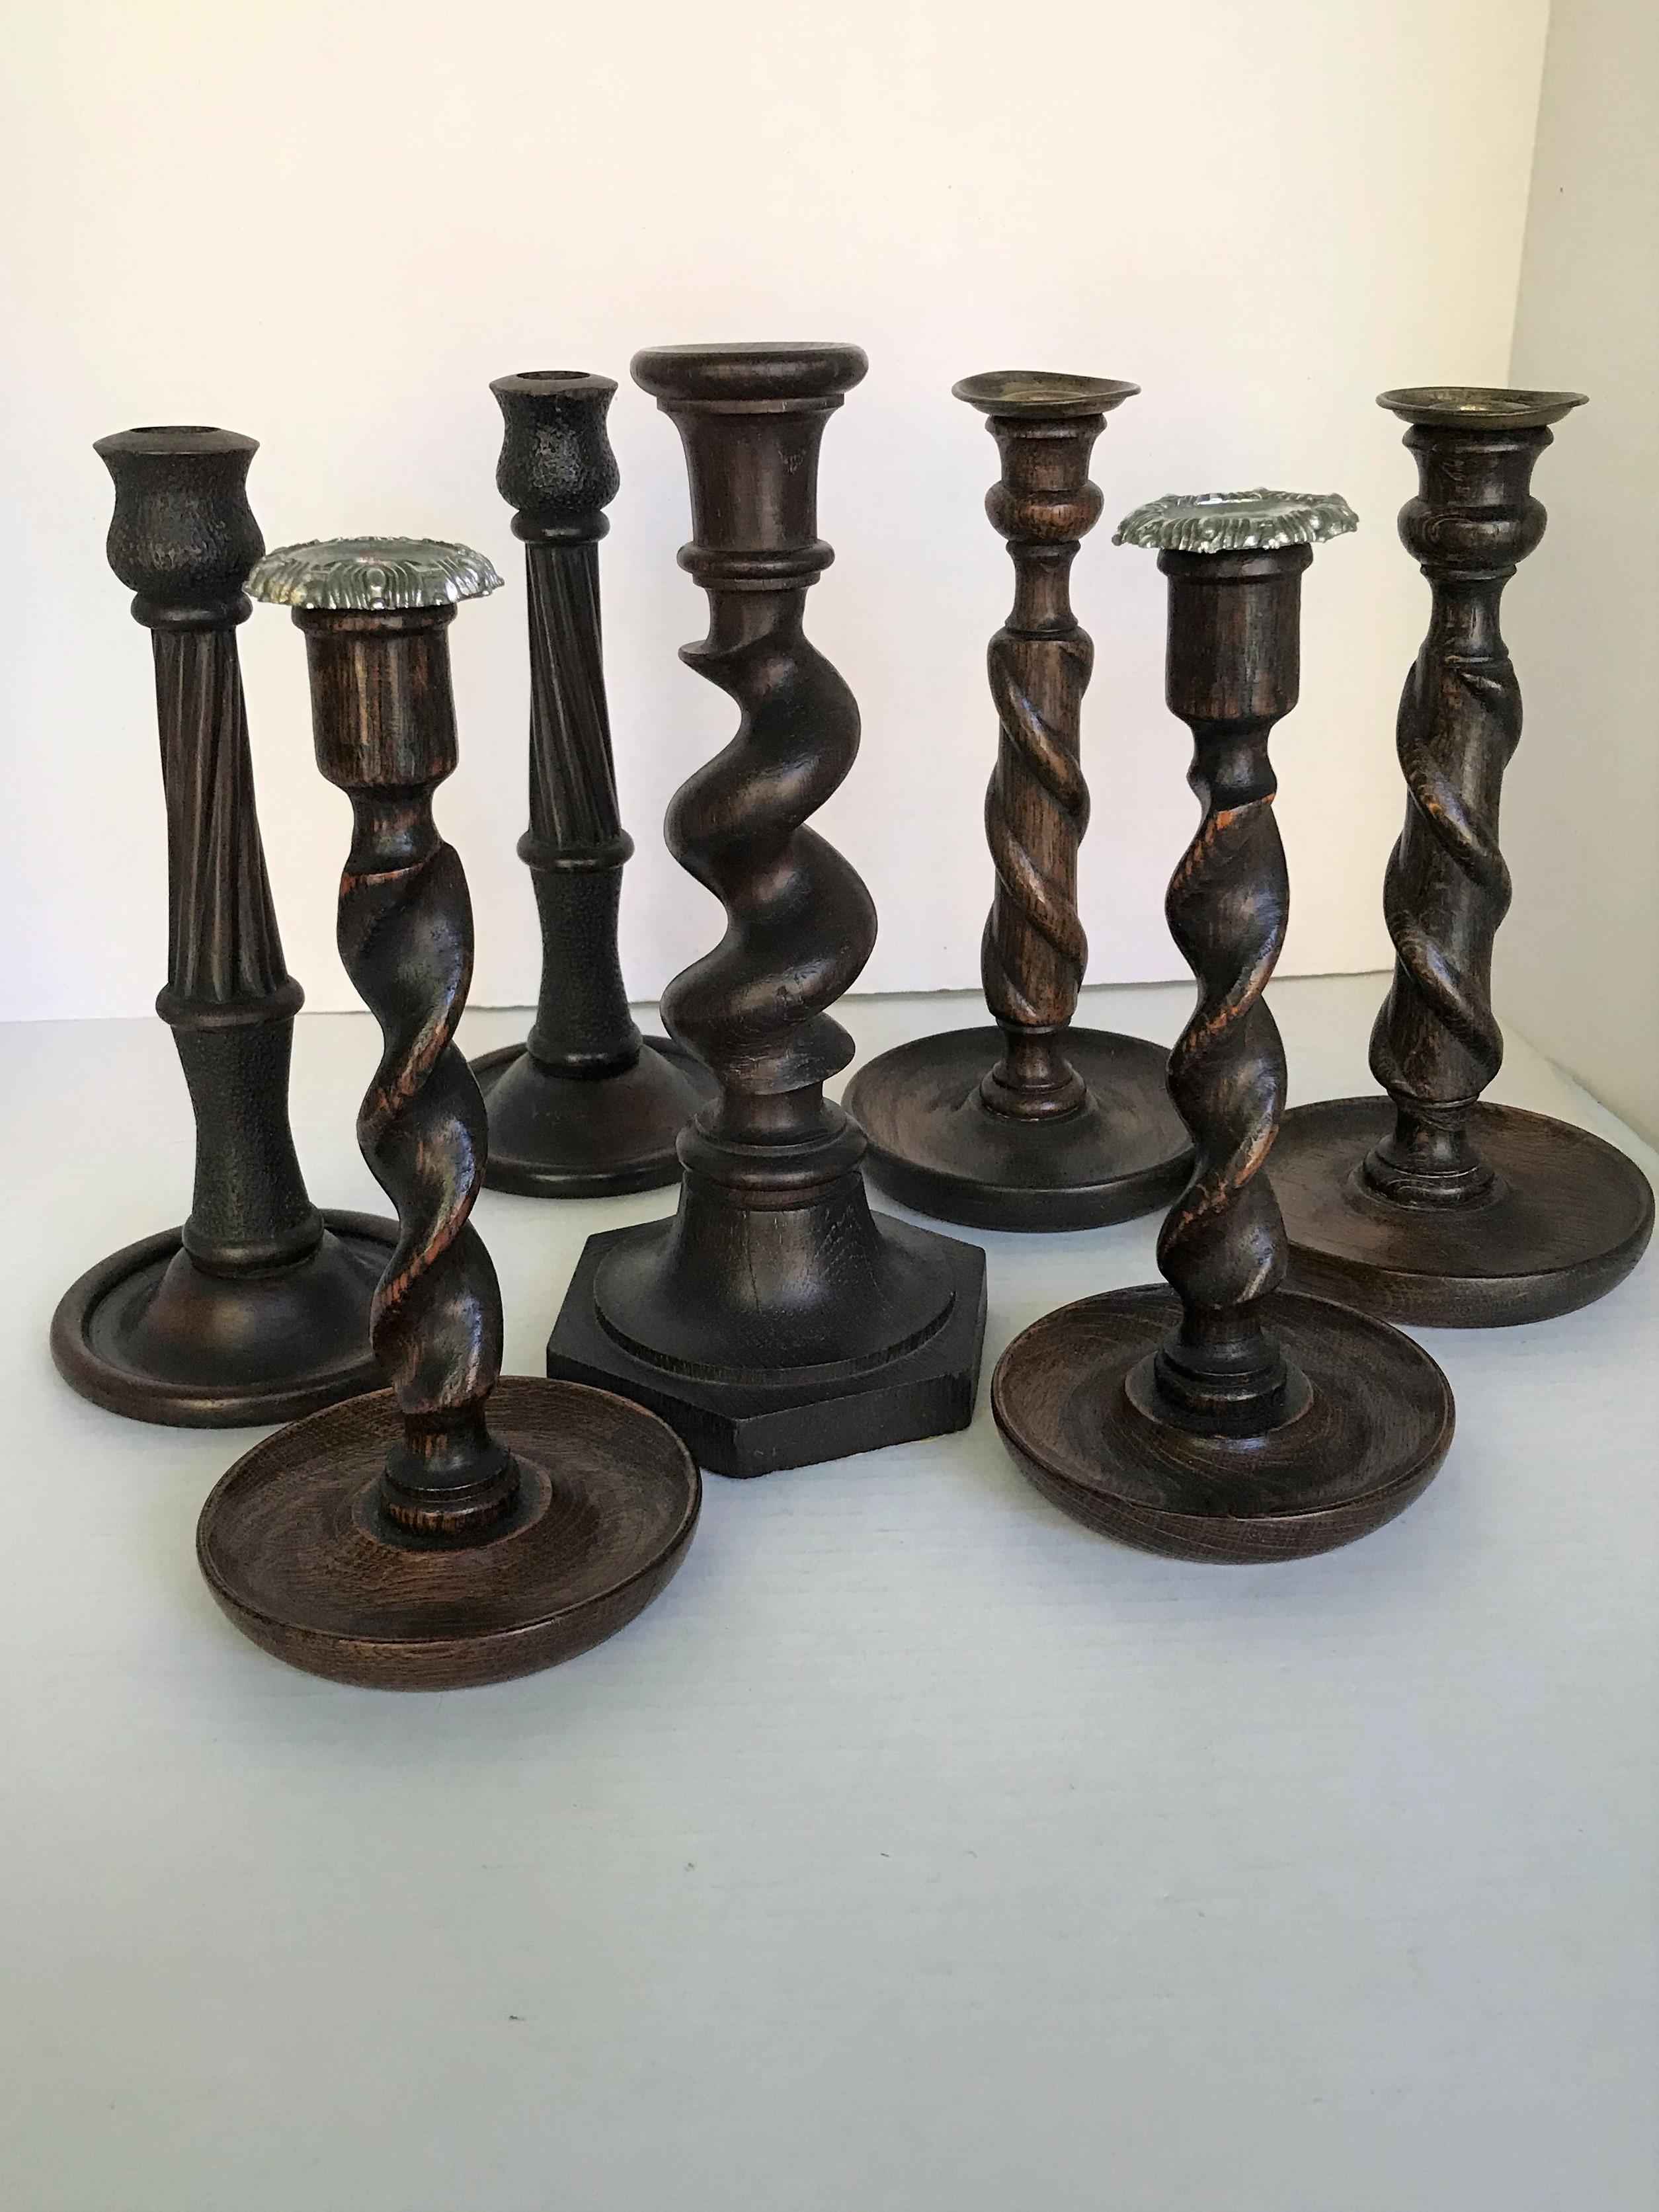 Grouping of Victorian and Edwardian (possibily earlier) Era Candlesticks set of 7. Set contains: a single Oak Barley Twist stick with a 6-sided base, one pair with twisting tendril on cydrindical post with brass bobeche, one pair of Oak Barley Twist